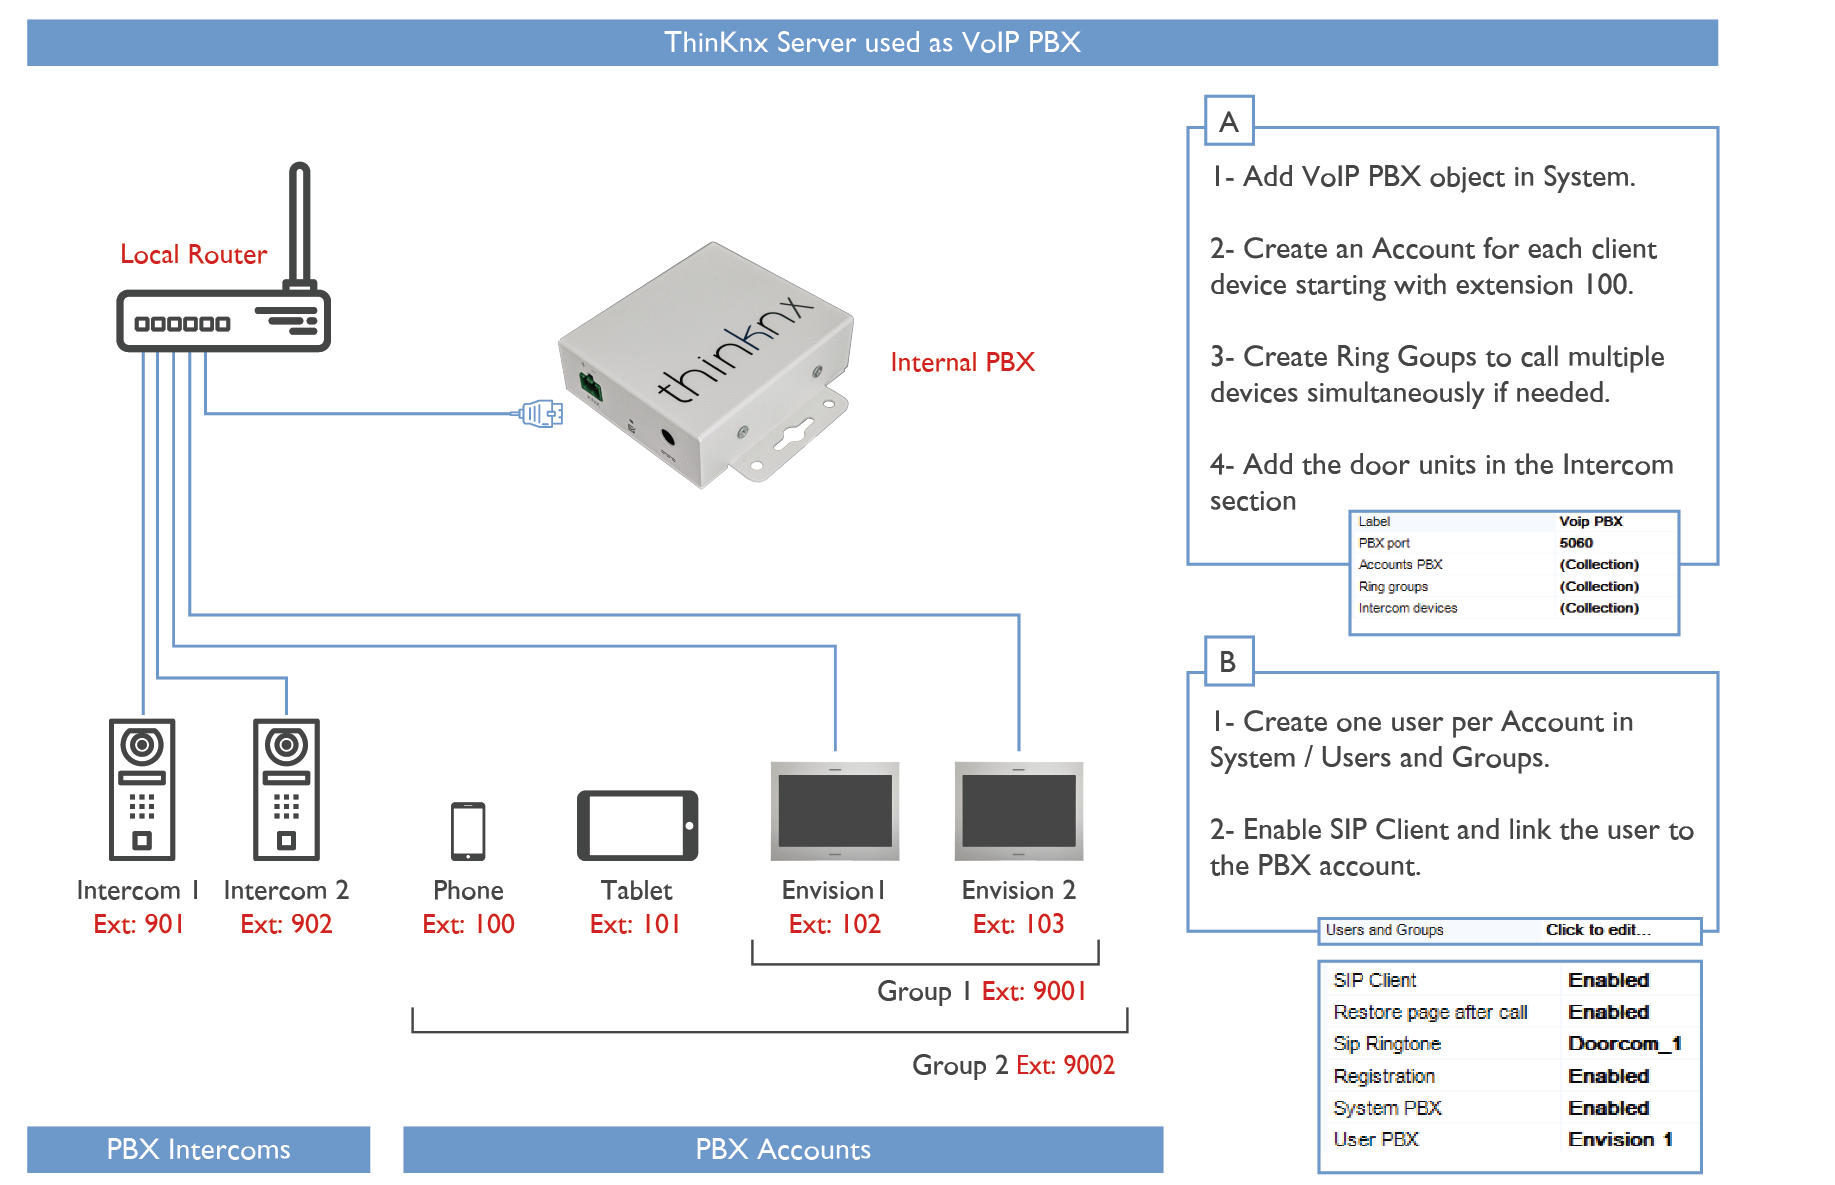 Thinknx server used as a VoIP PBX